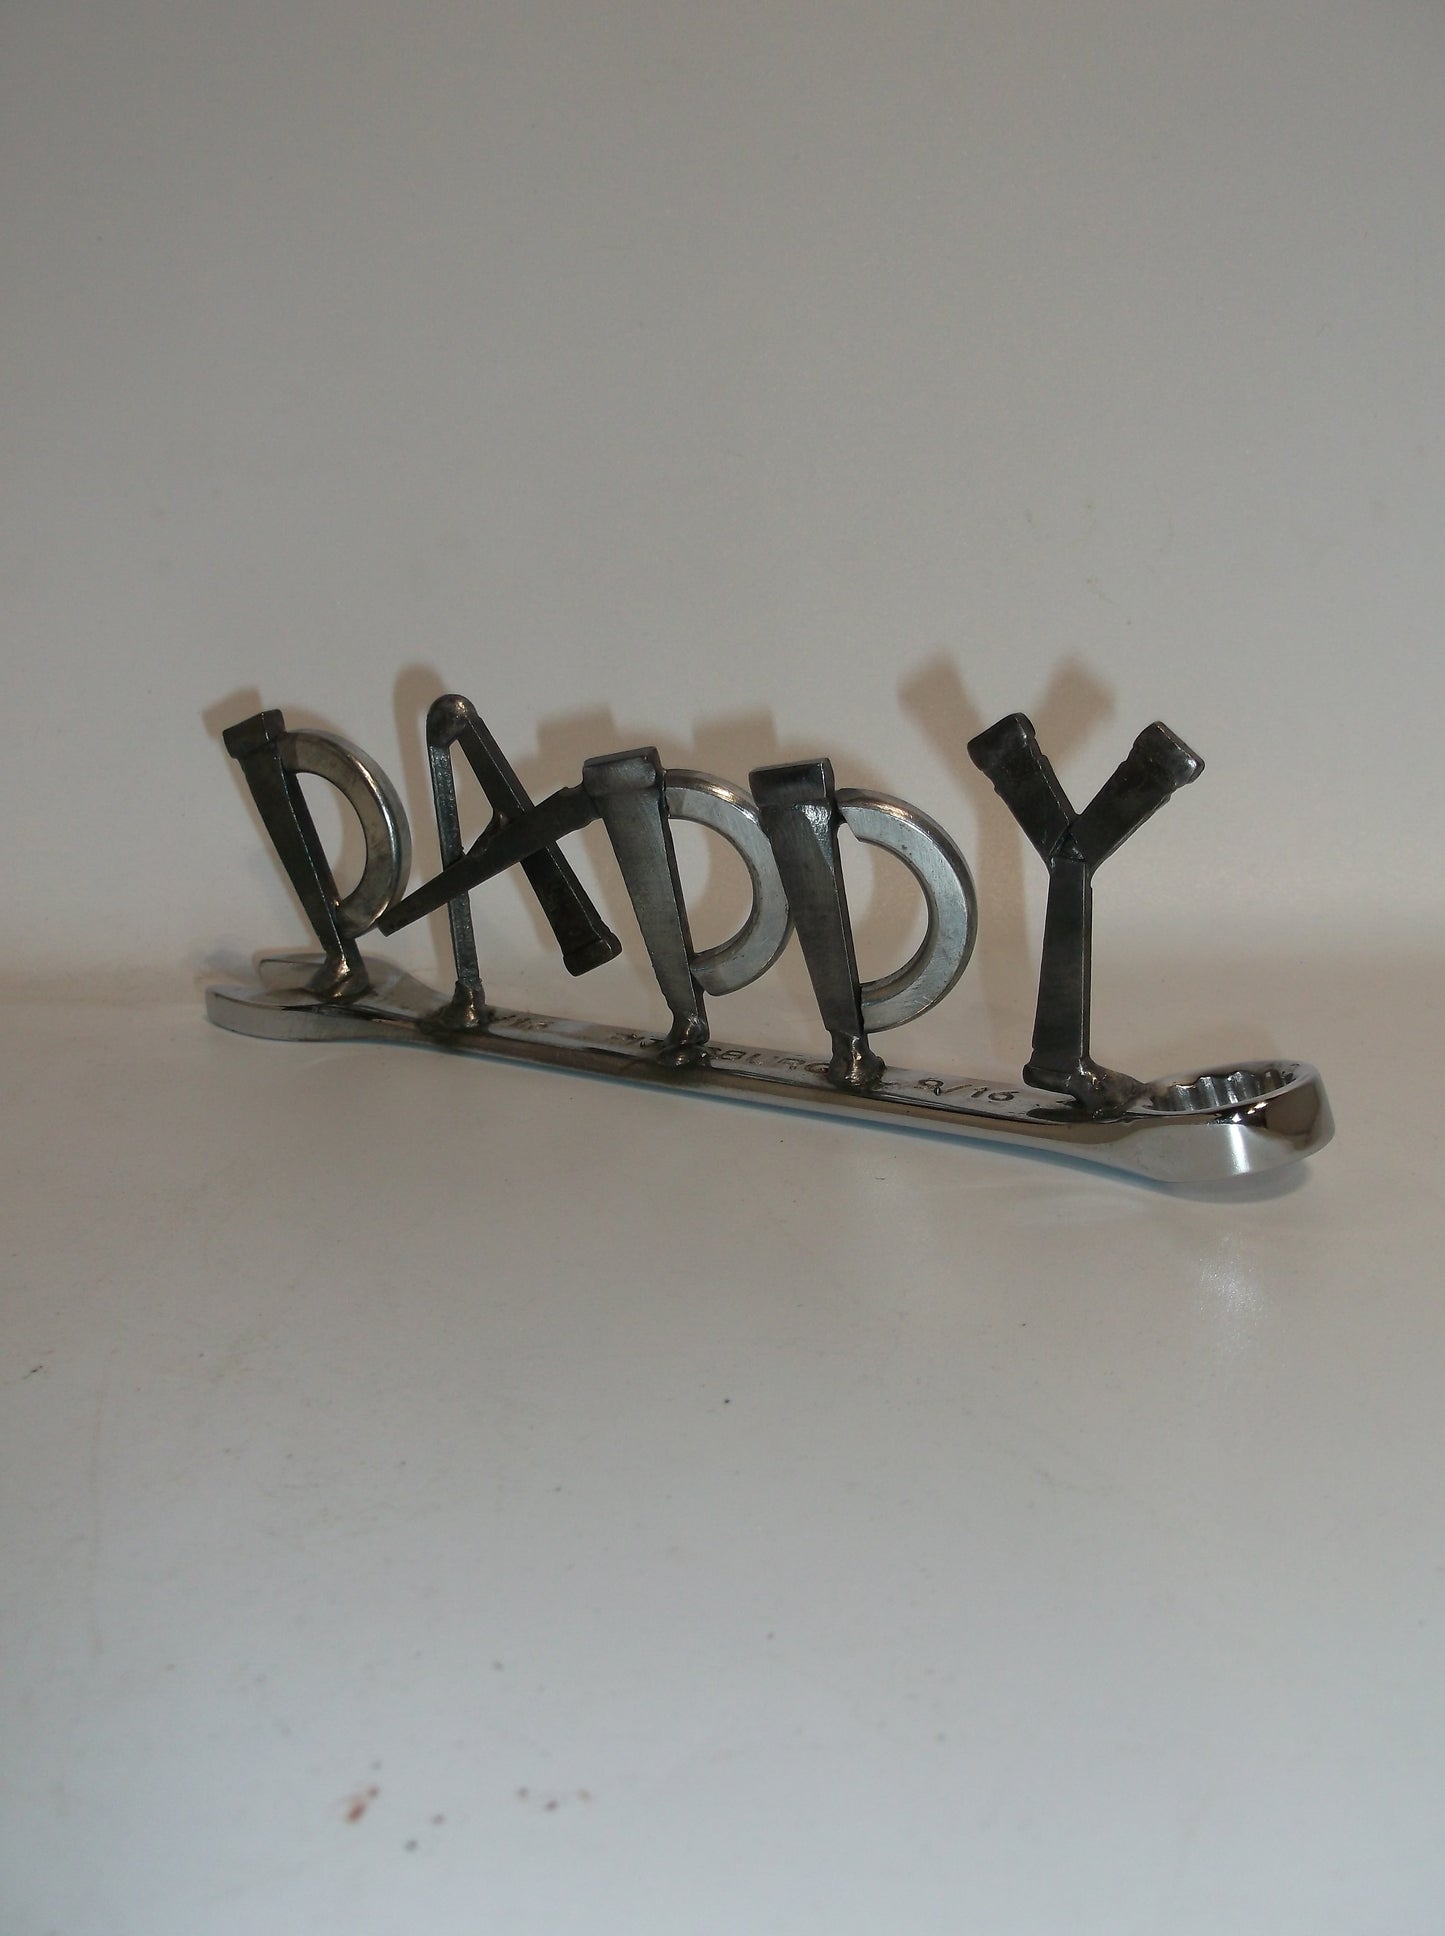 Daddy on a Wrench, Father's Day present, wrench, tools, handyman, mechanic